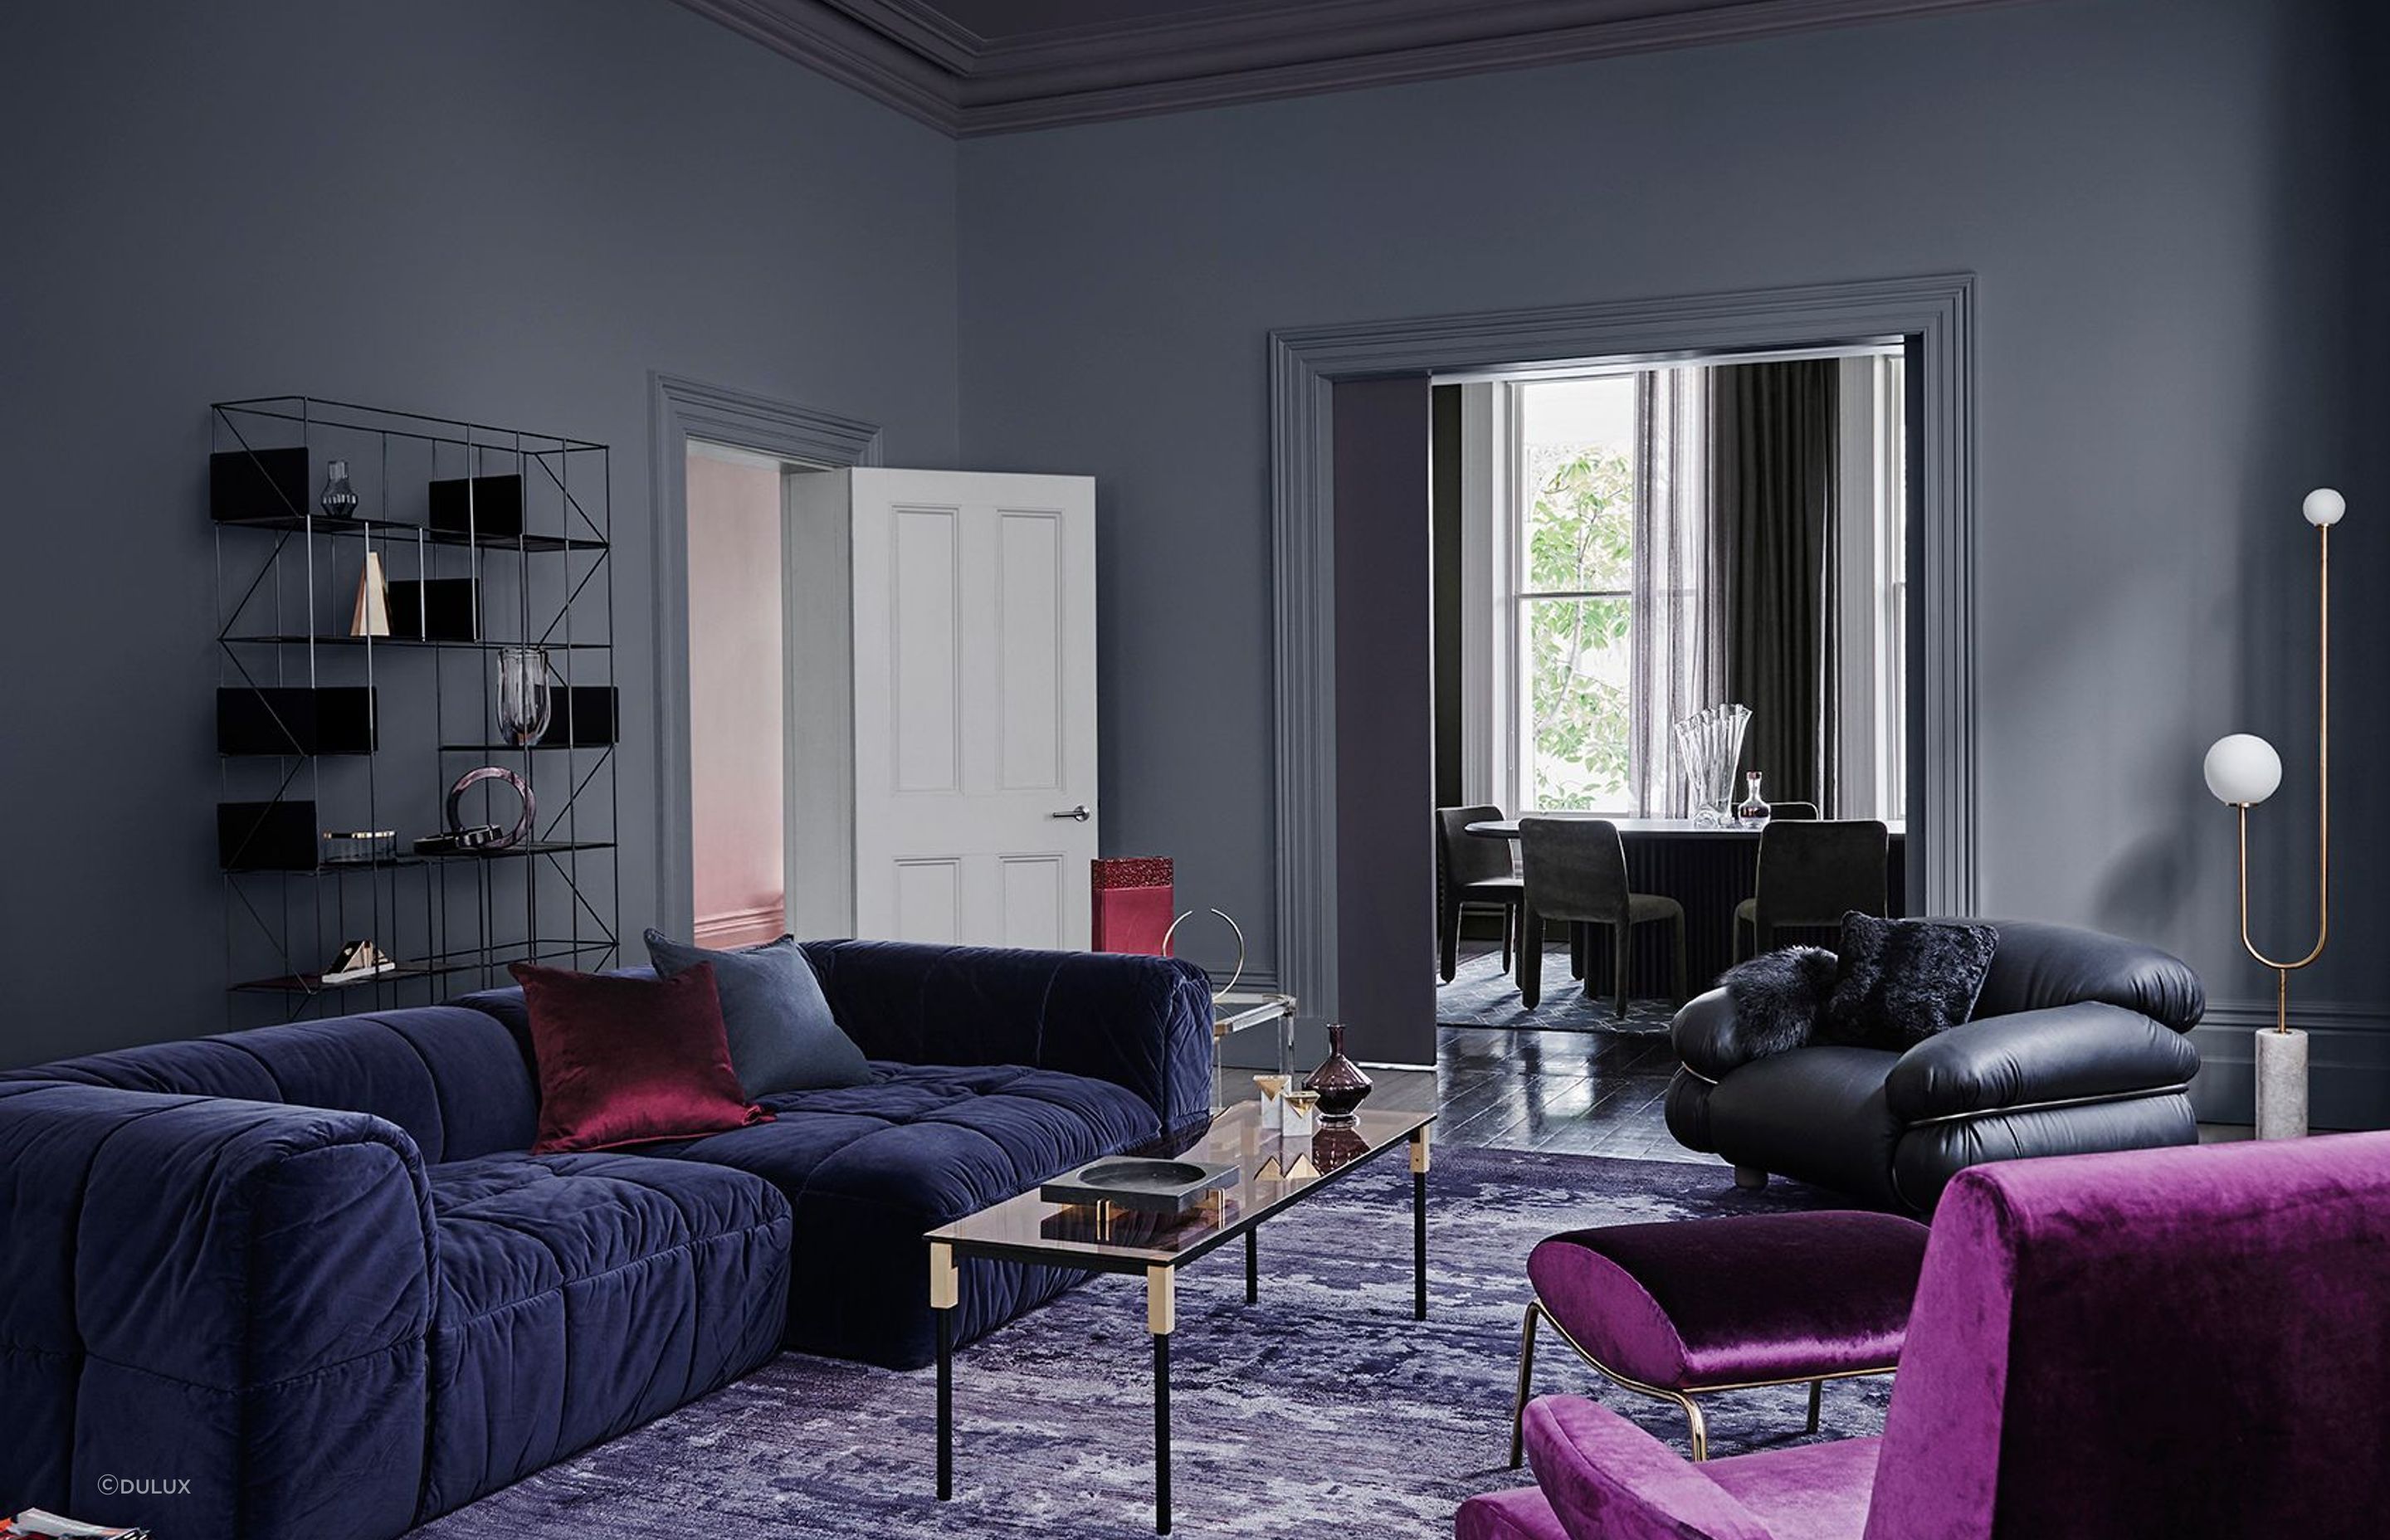 Monochromatic colour schemes use different shades of the same colour to create a cohesive and unified feel.